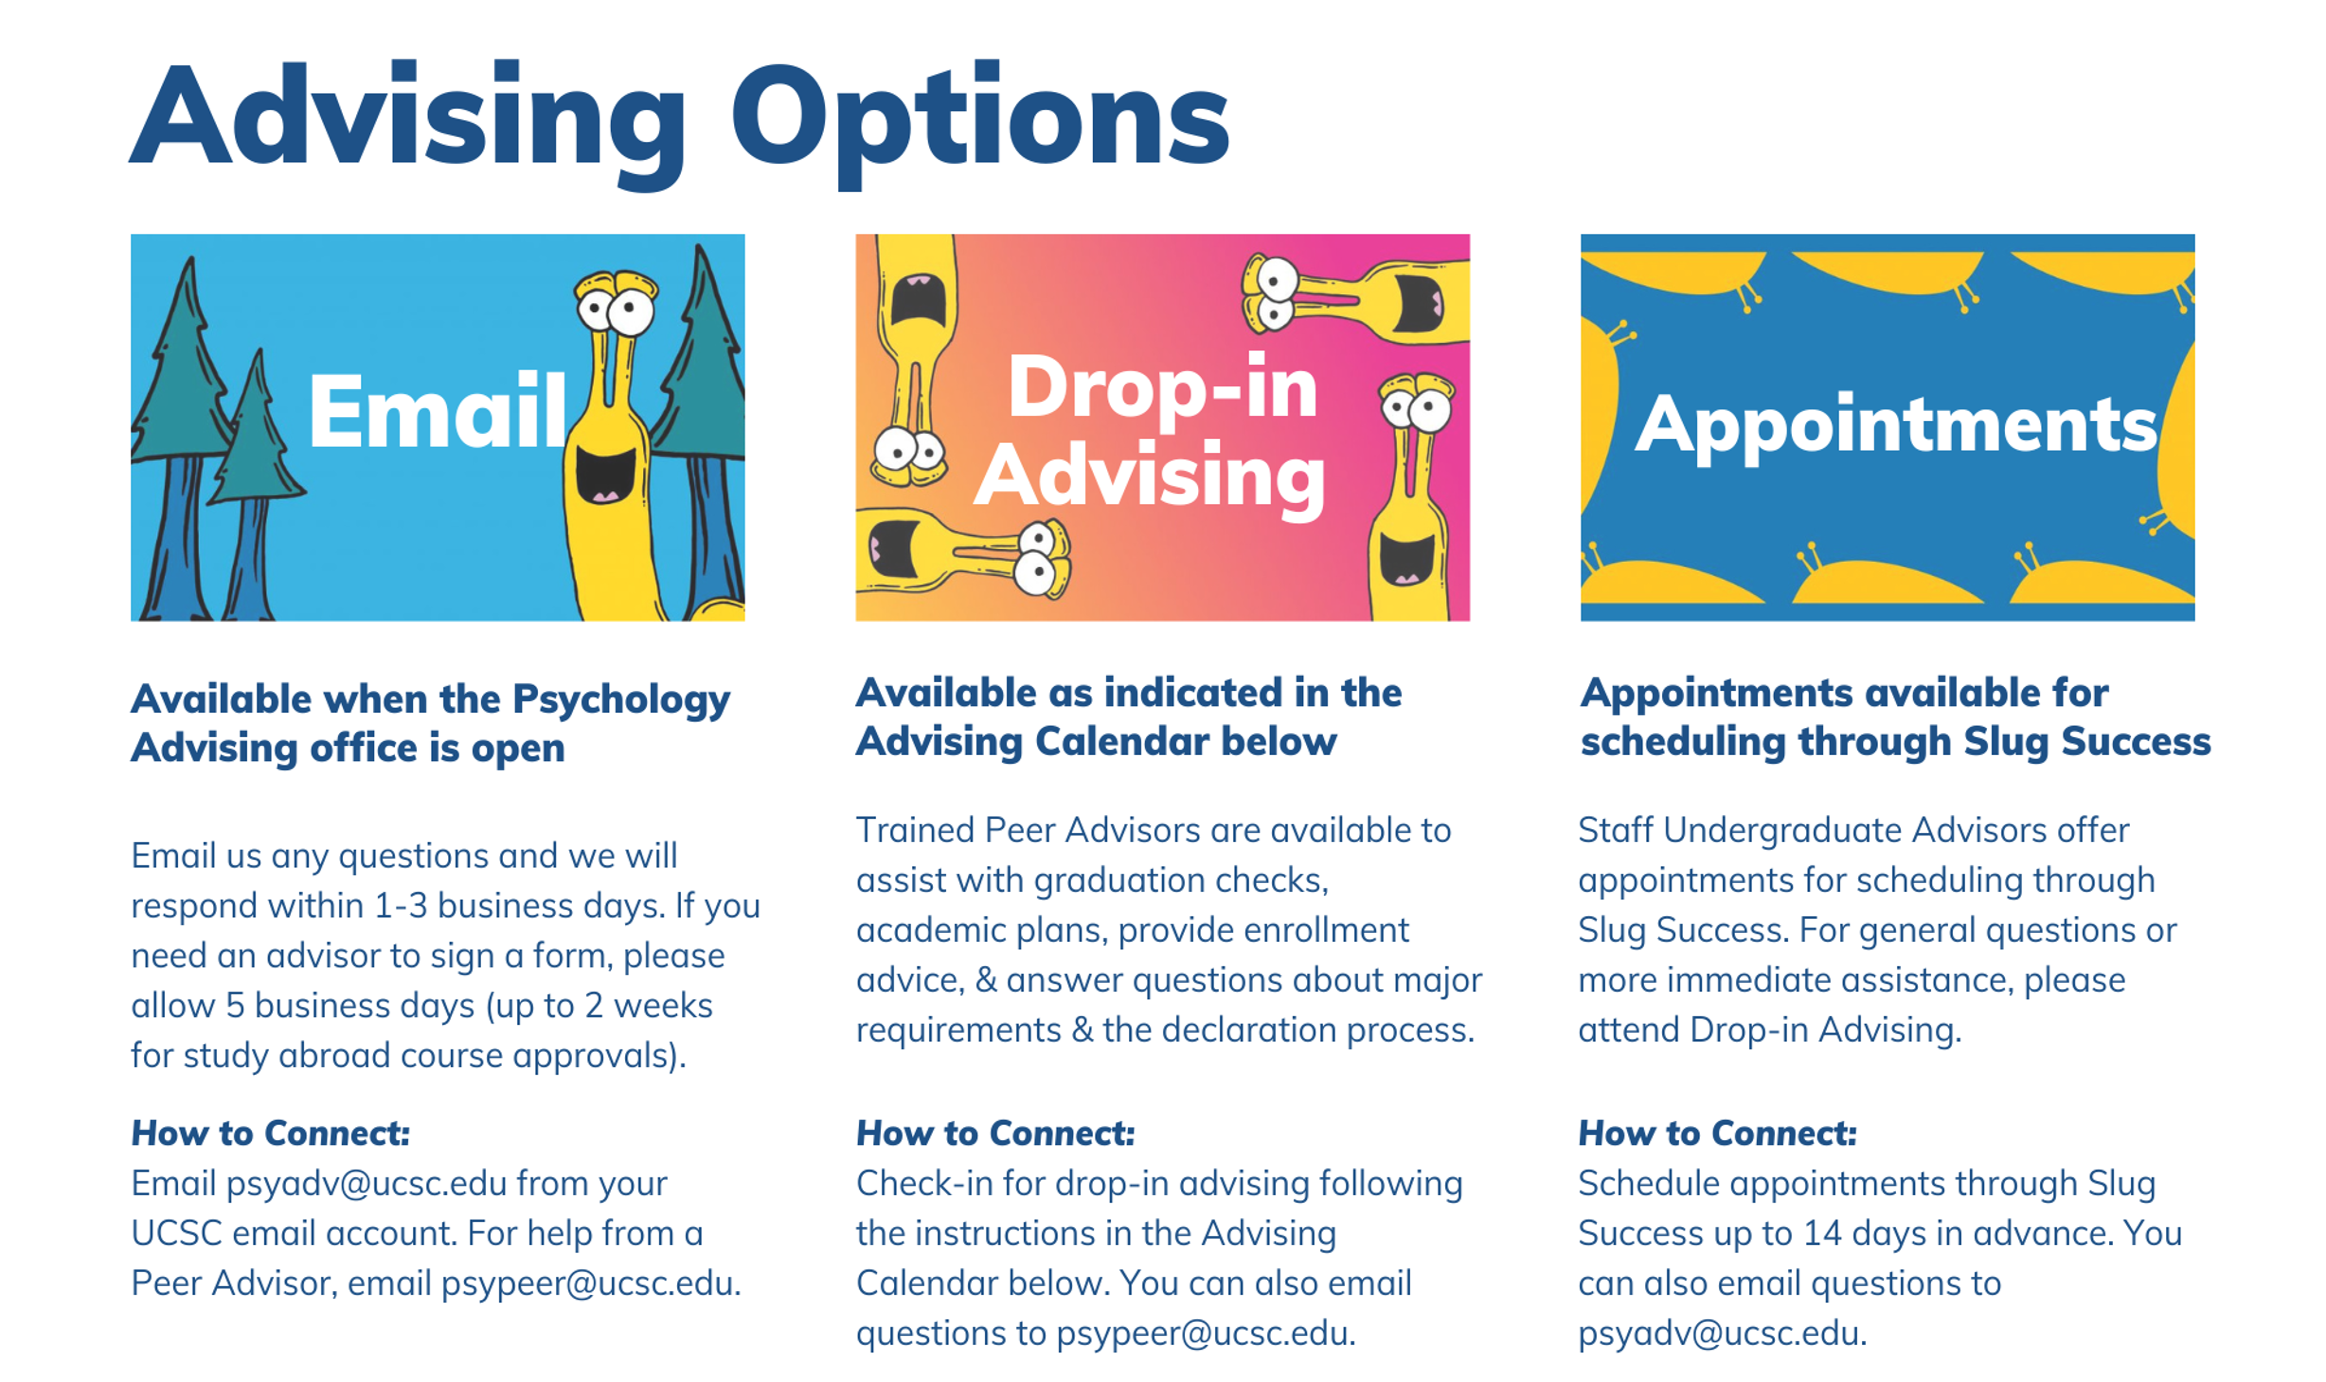 advising-options-ucscpsychdept-1.png